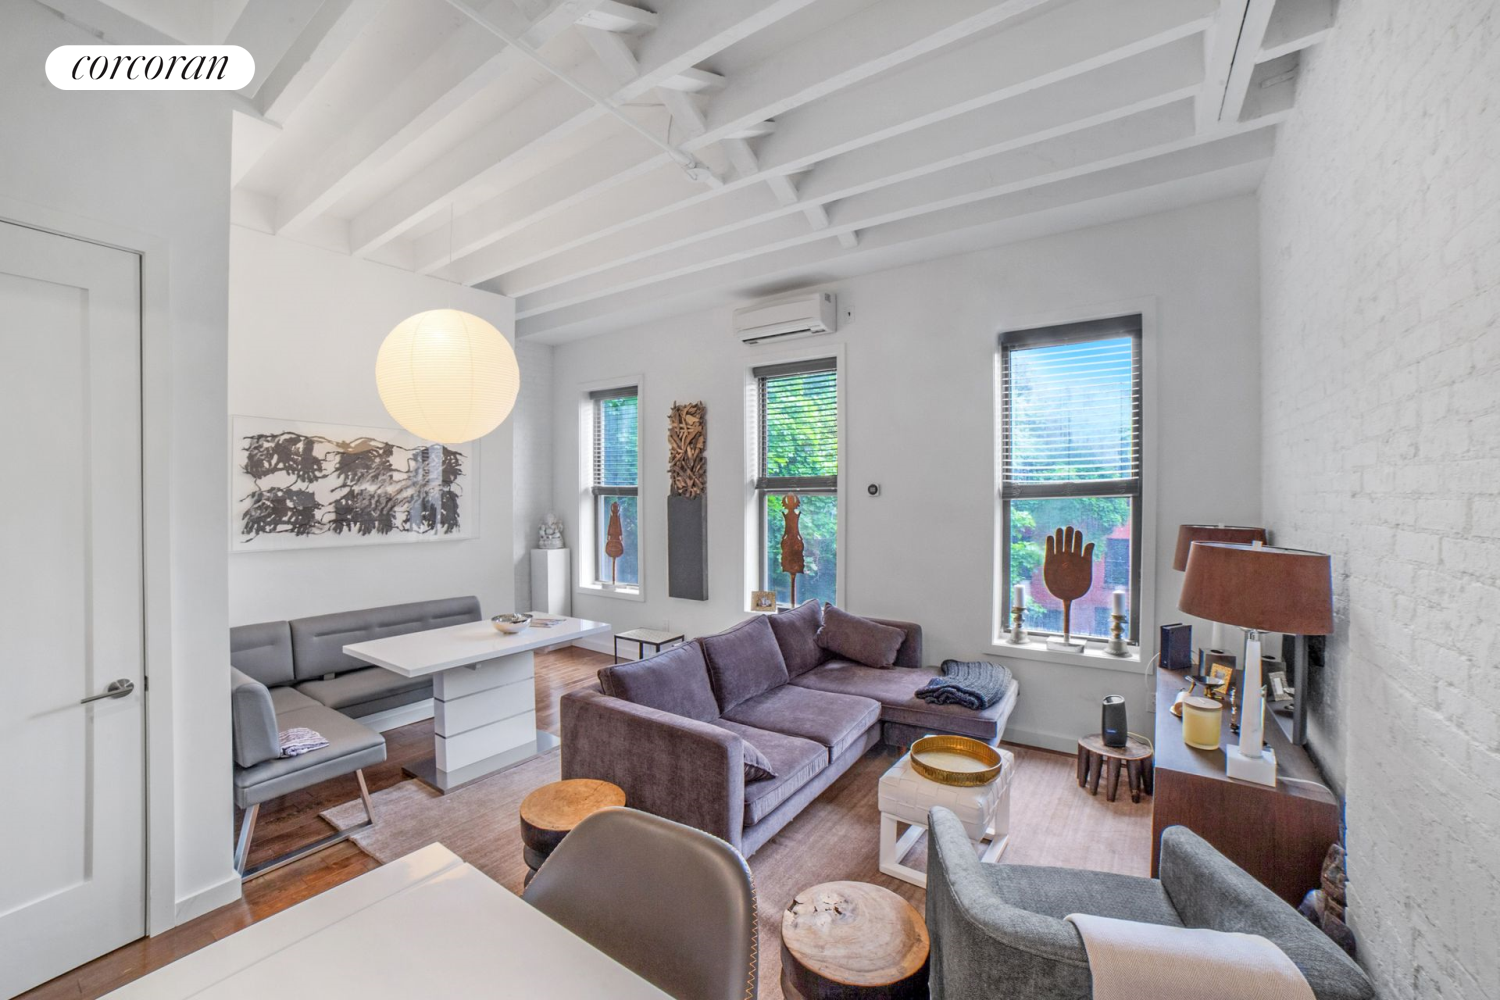 68 Perry Street Ph, West Village, Downtown, NYC - 2 Bedrooms  
2 Bathrooms  
3 Rooms - 